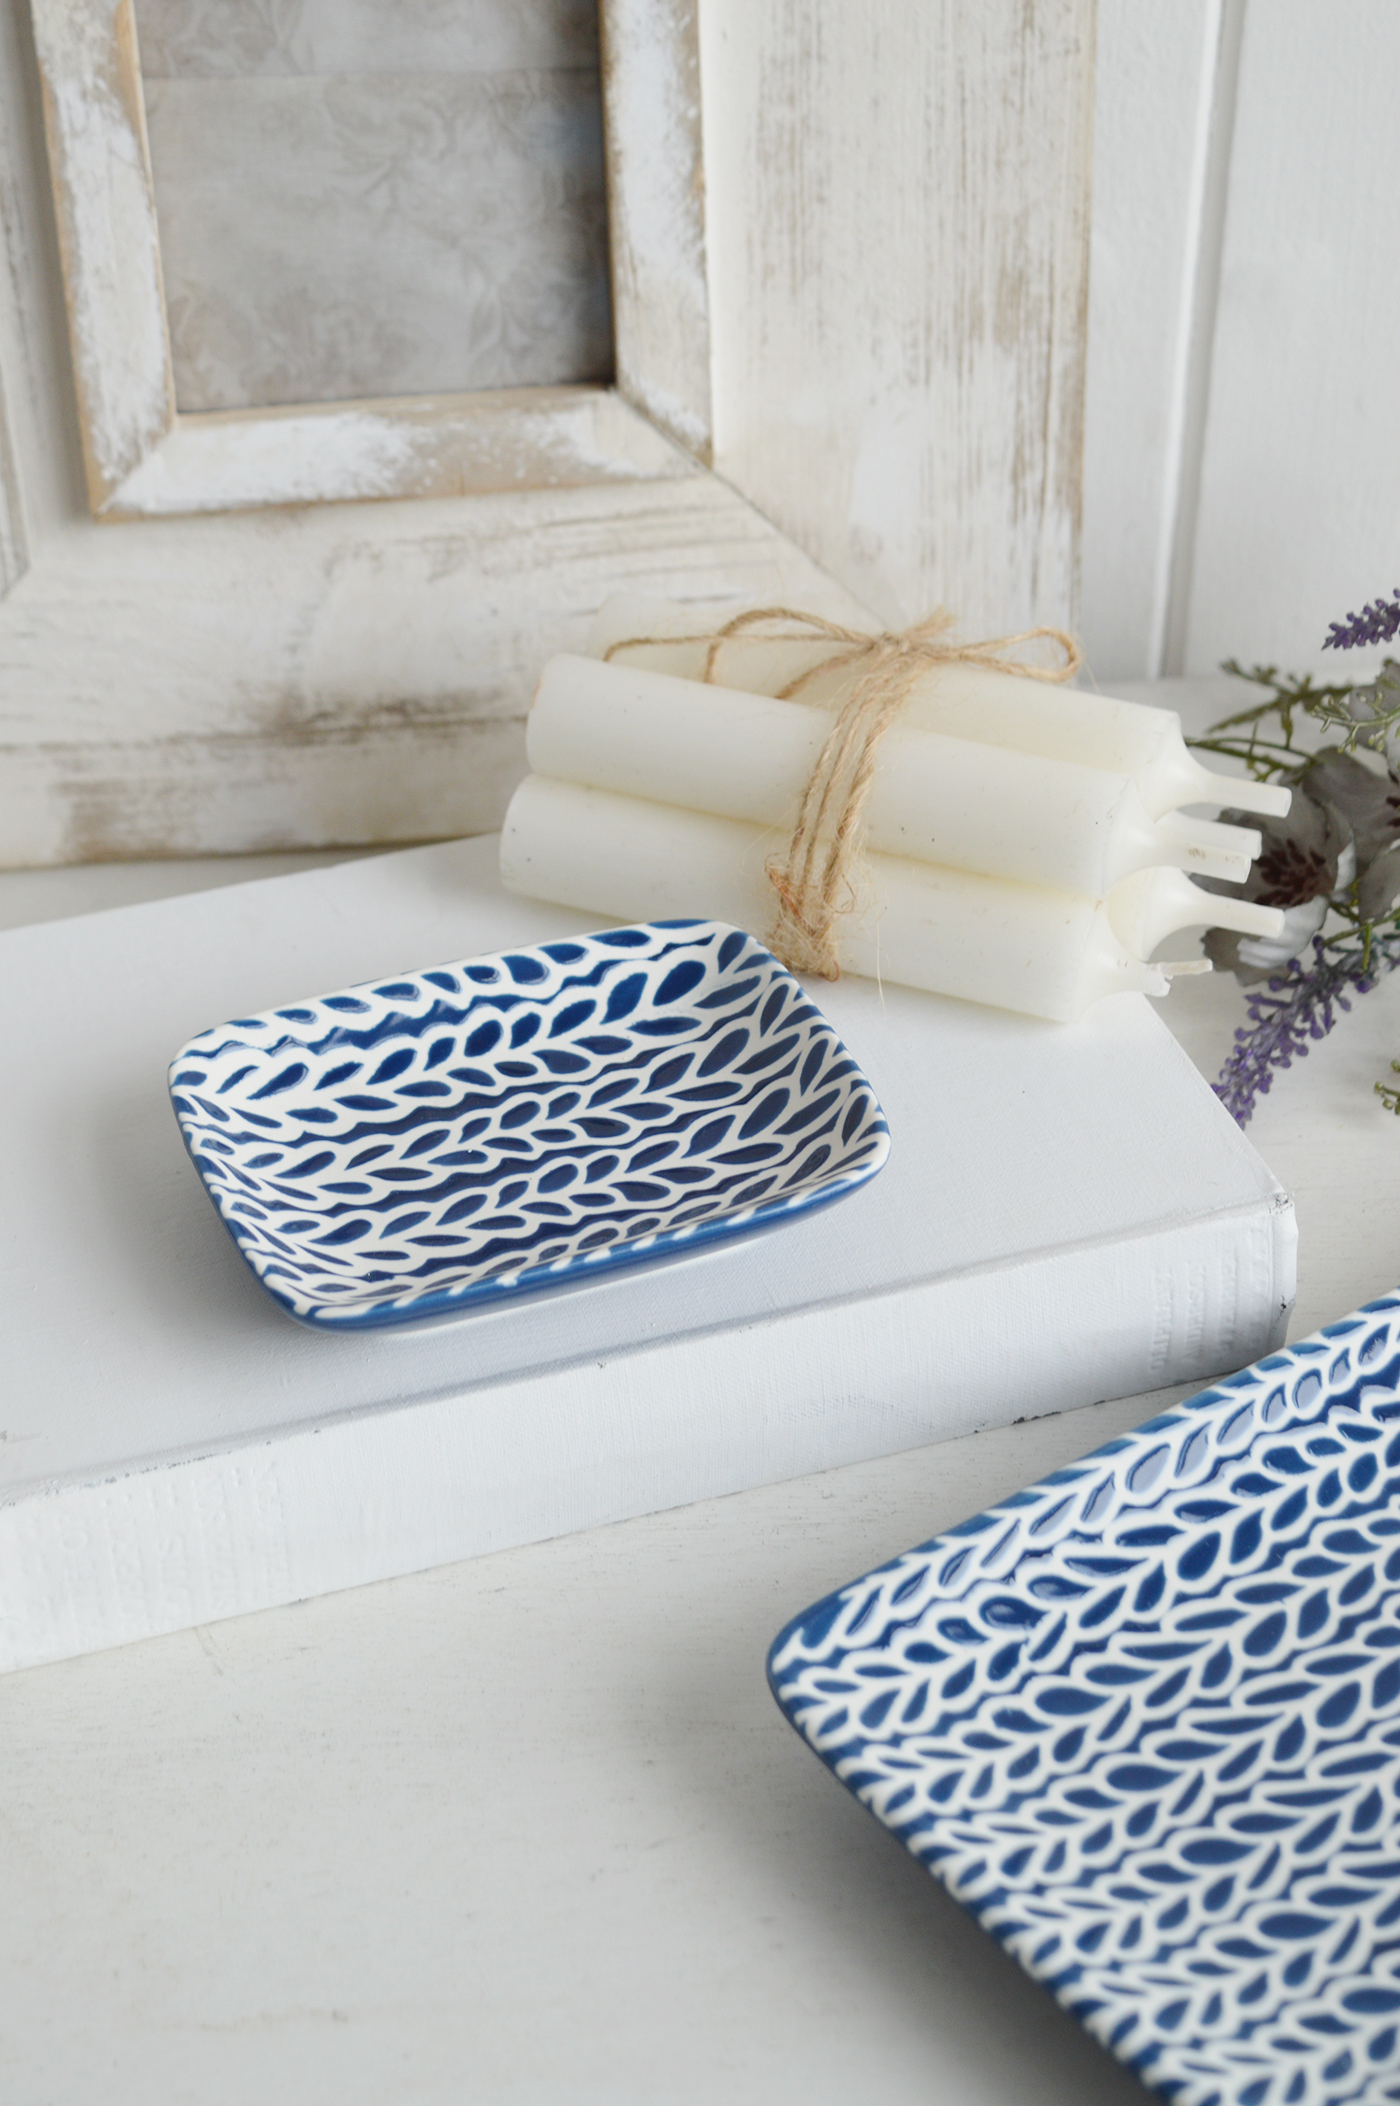 Norwell Navy Blue and White Trinket Dishes for New England styling and white interiors. Coastal, modern farmhouse furniture and home decor